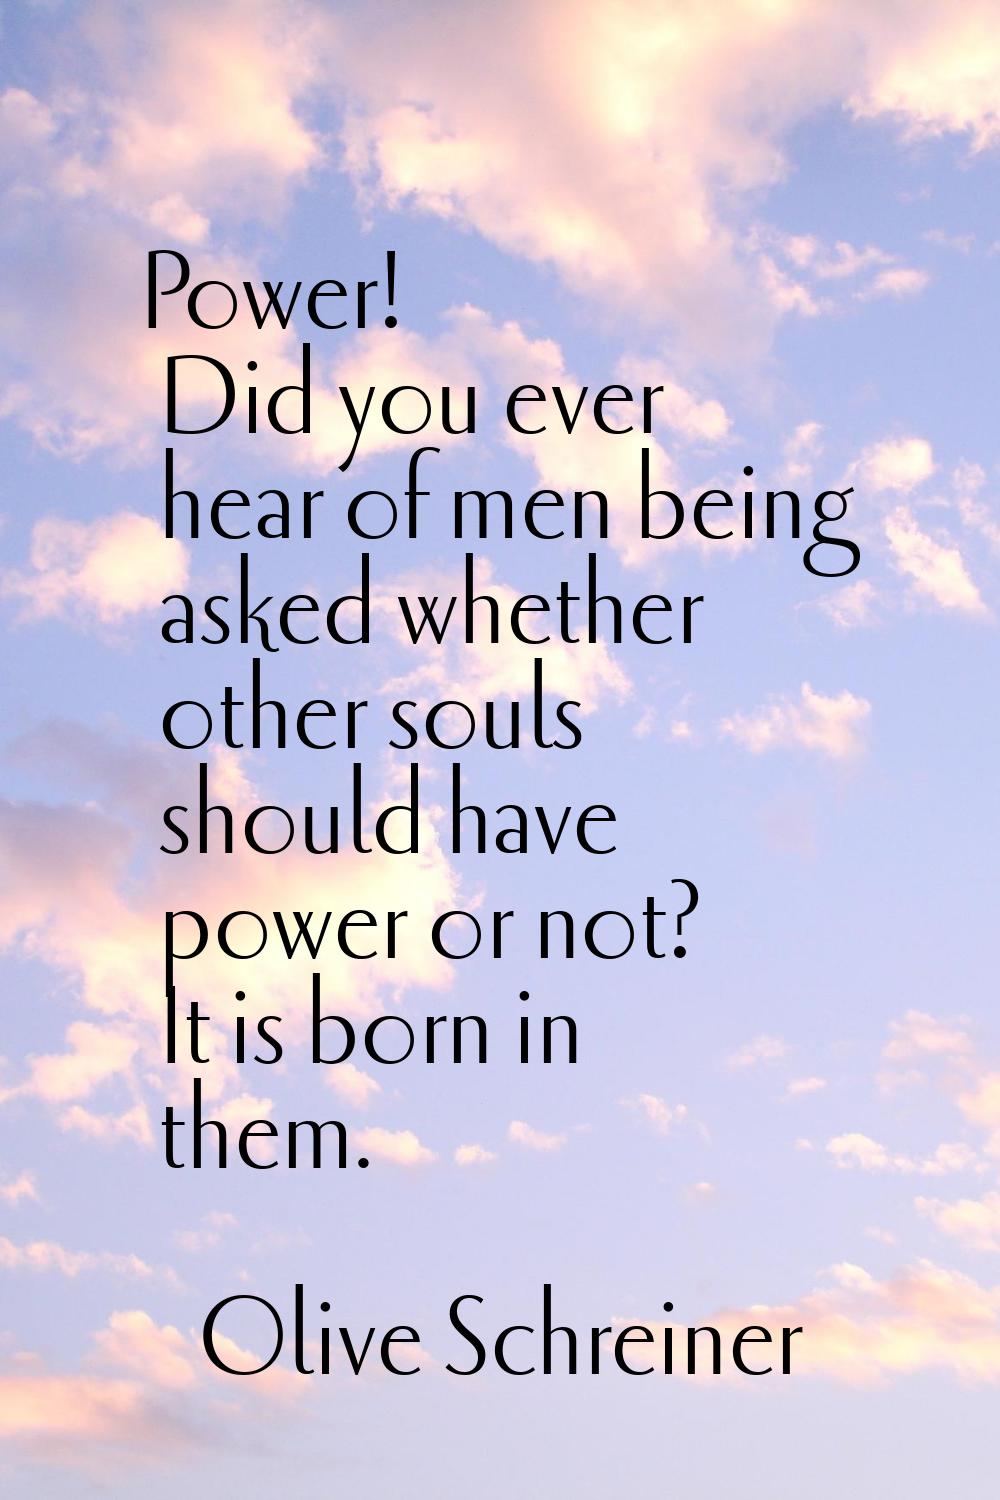 Power! Did you ever hear of men being asked whether other souls should have power or not? It is bor